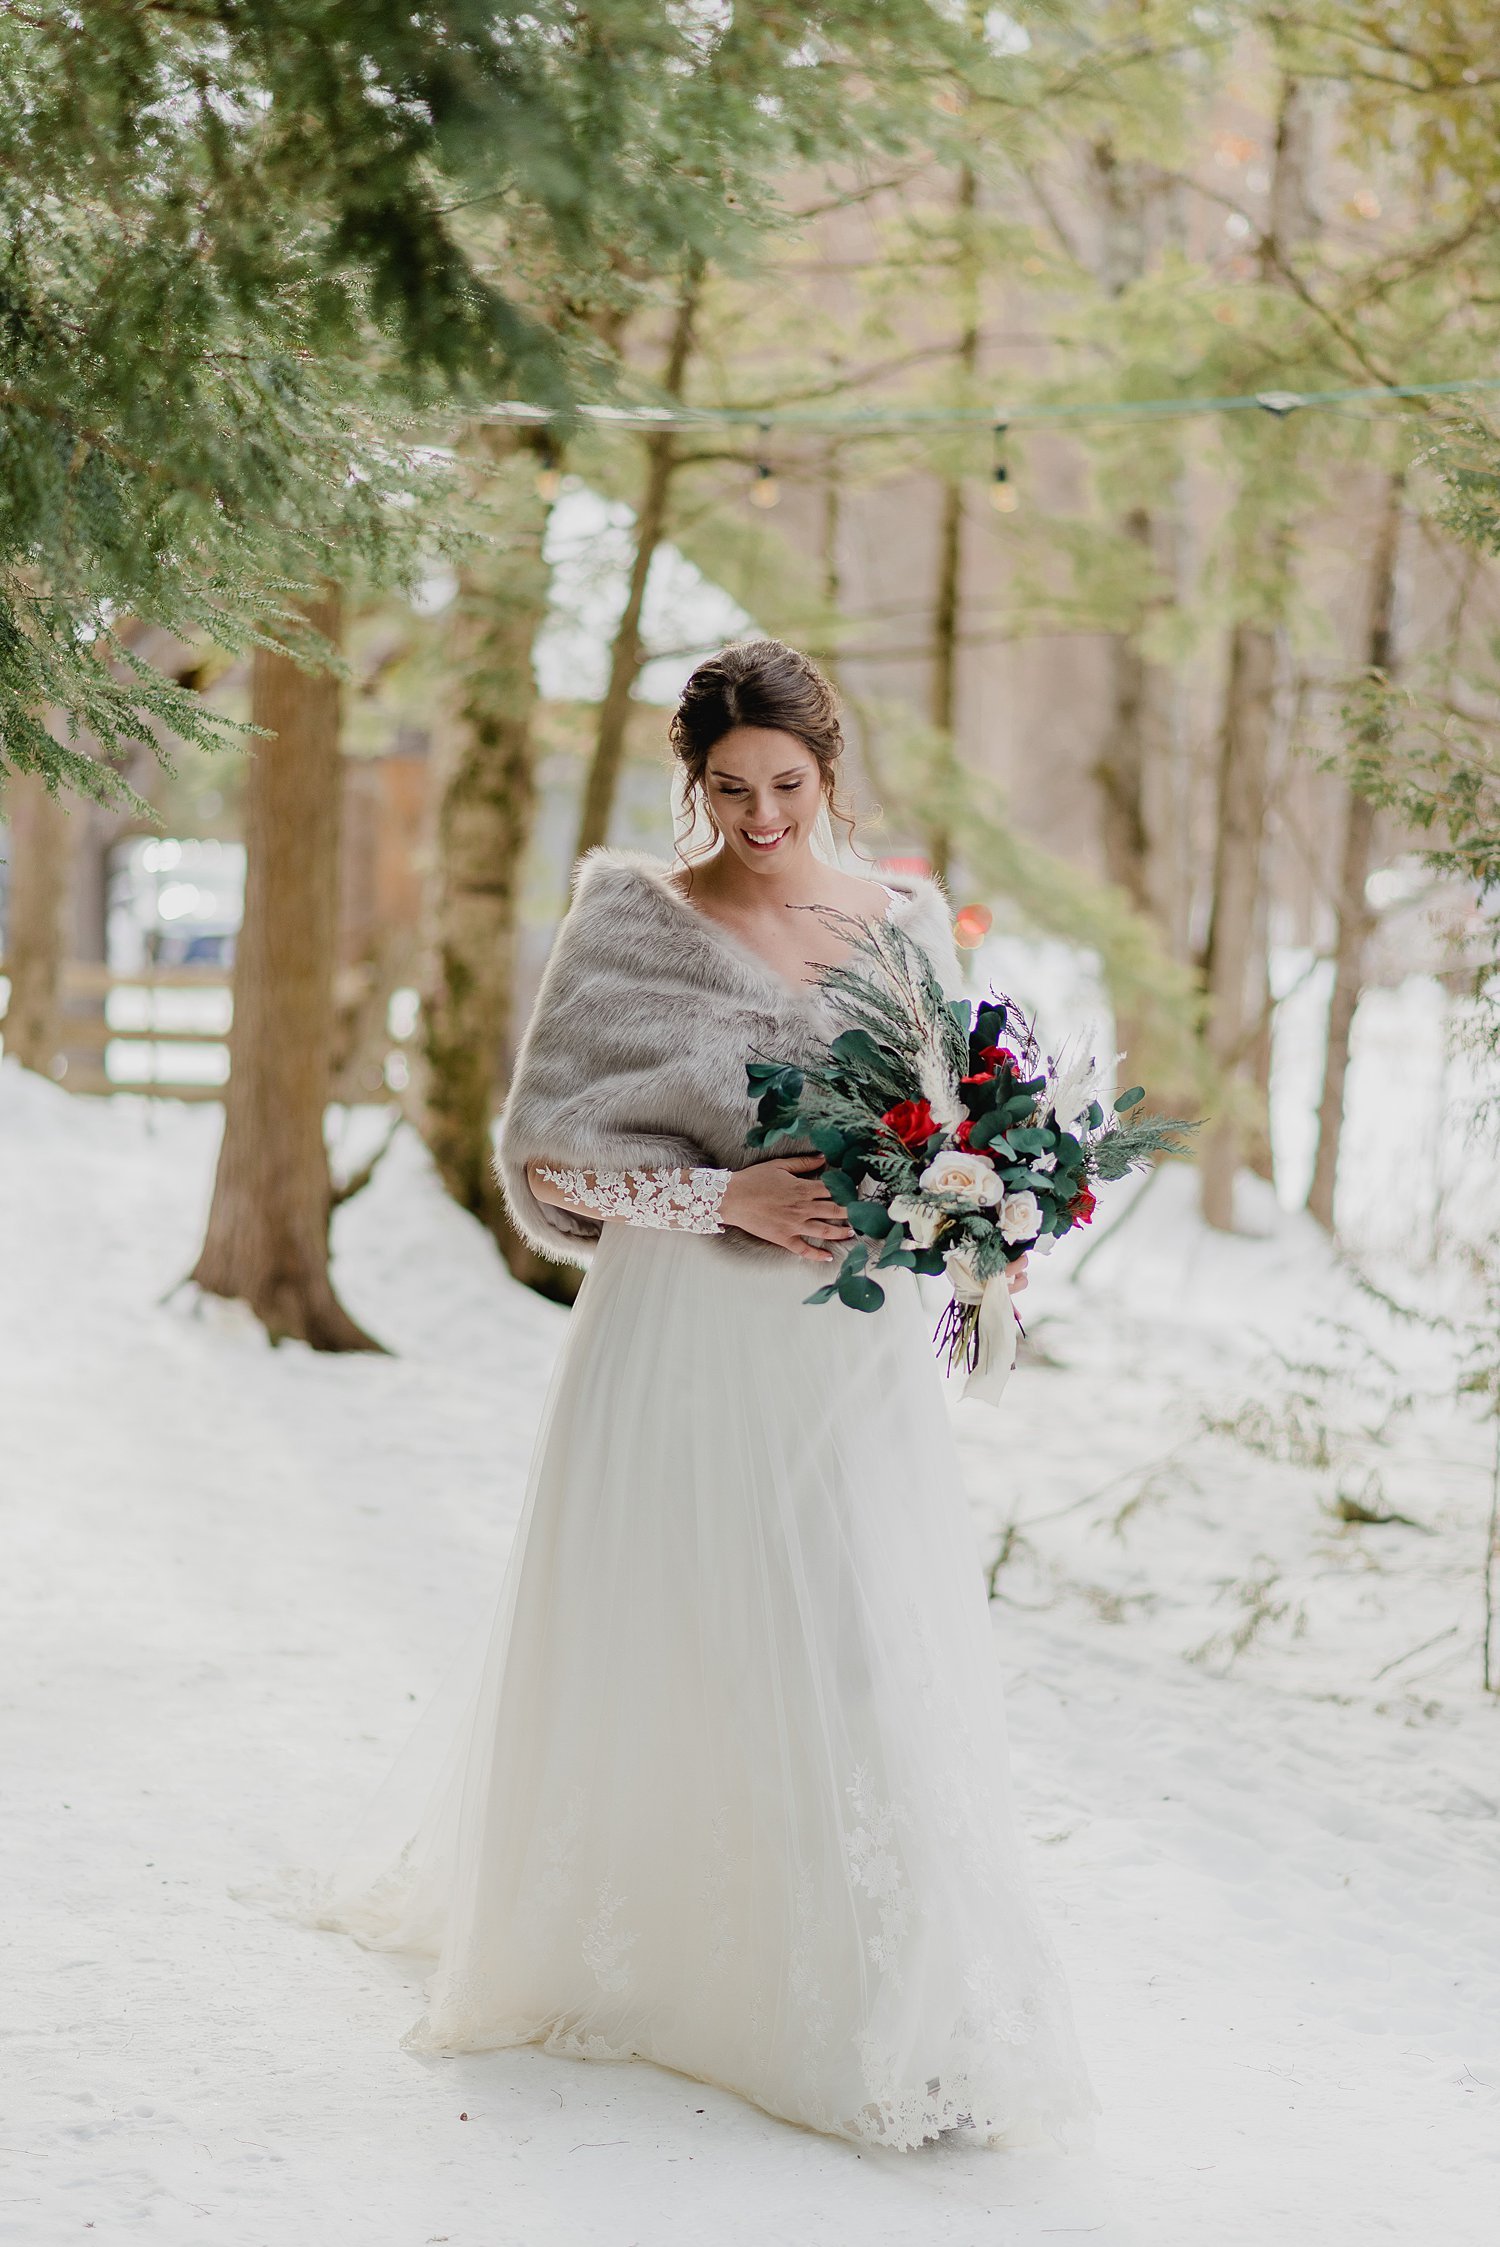 Intimate Winter Elopement at O'Hara Mill Homestead in Madoc, Ontario | Prince Edward County Wedding Photographer | Holly McMurter Photographs_0002.jpg